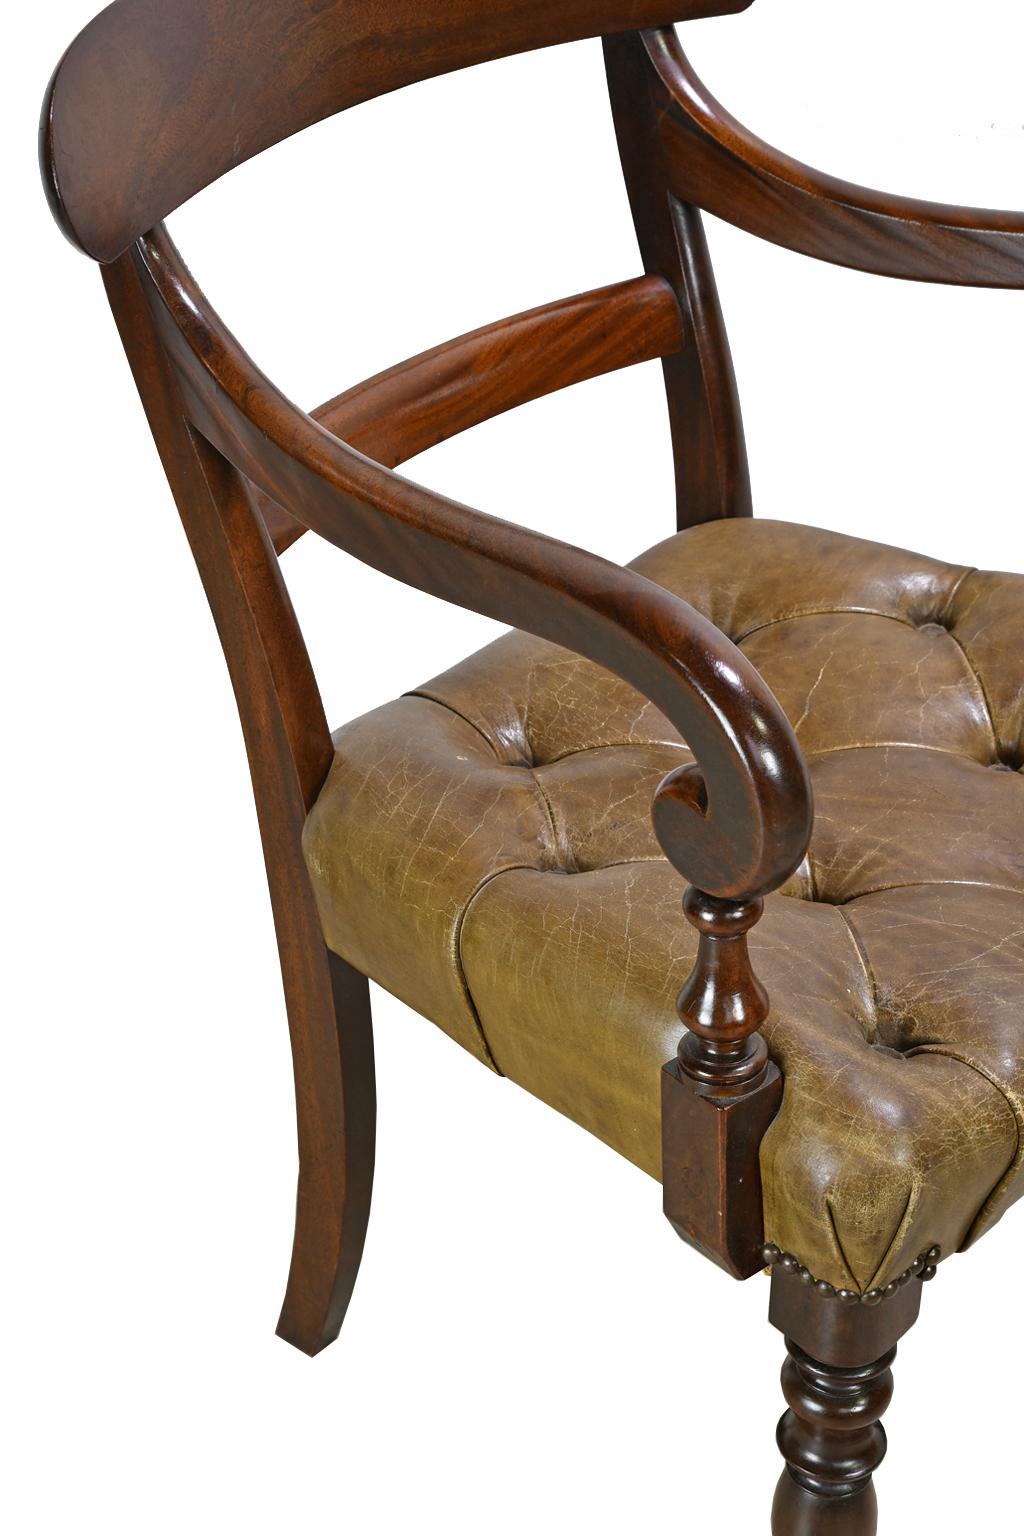 Early Victorian Mahogany Armchair with Tufted Leather Upholstery, England For Sale 2